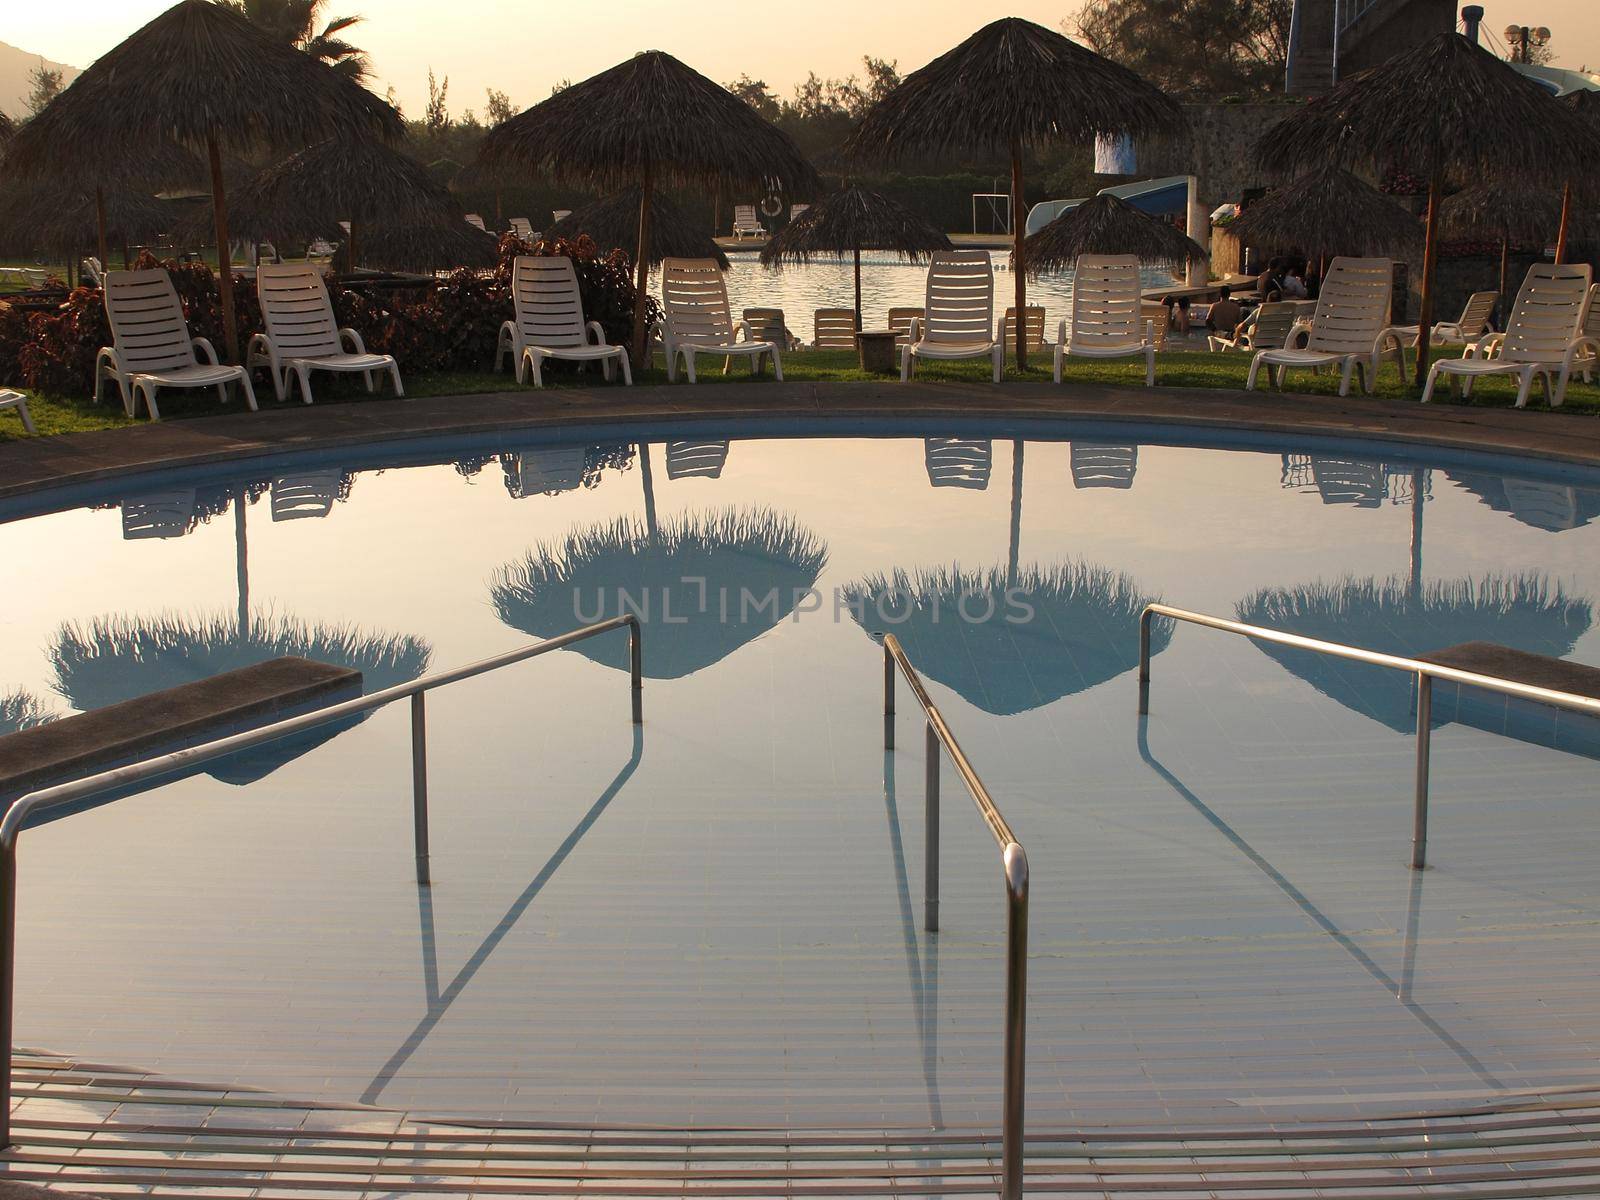 Swimming pool area of hotel with umbrella and beach chair Lima-Peru